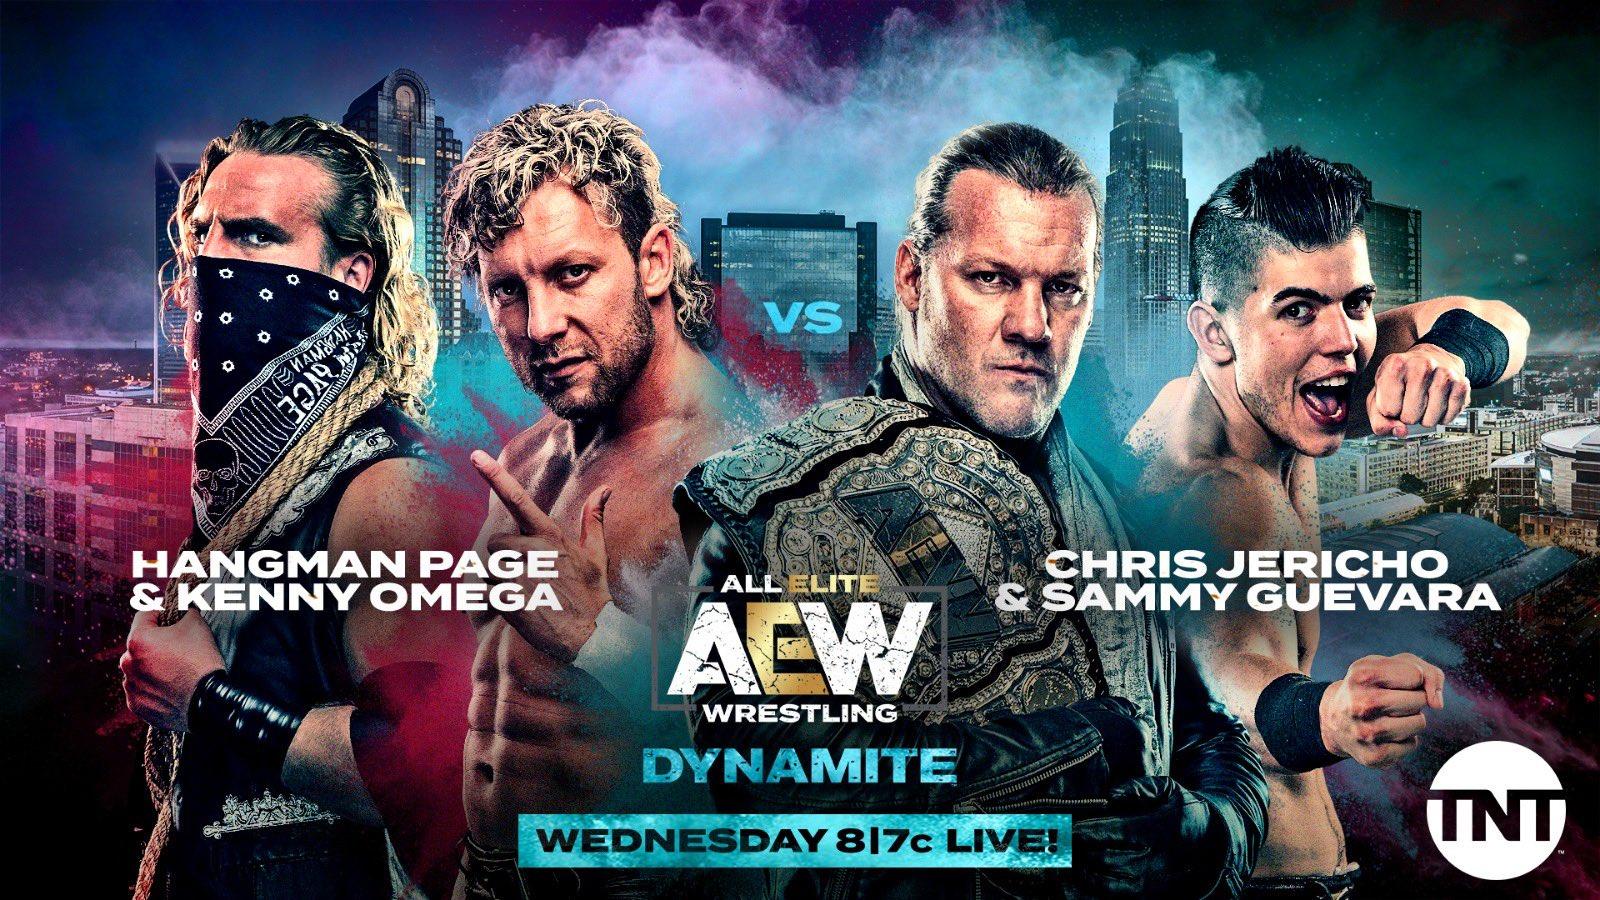 AEW Dynamite Results For November 2019: Page & Omega VS Jericho